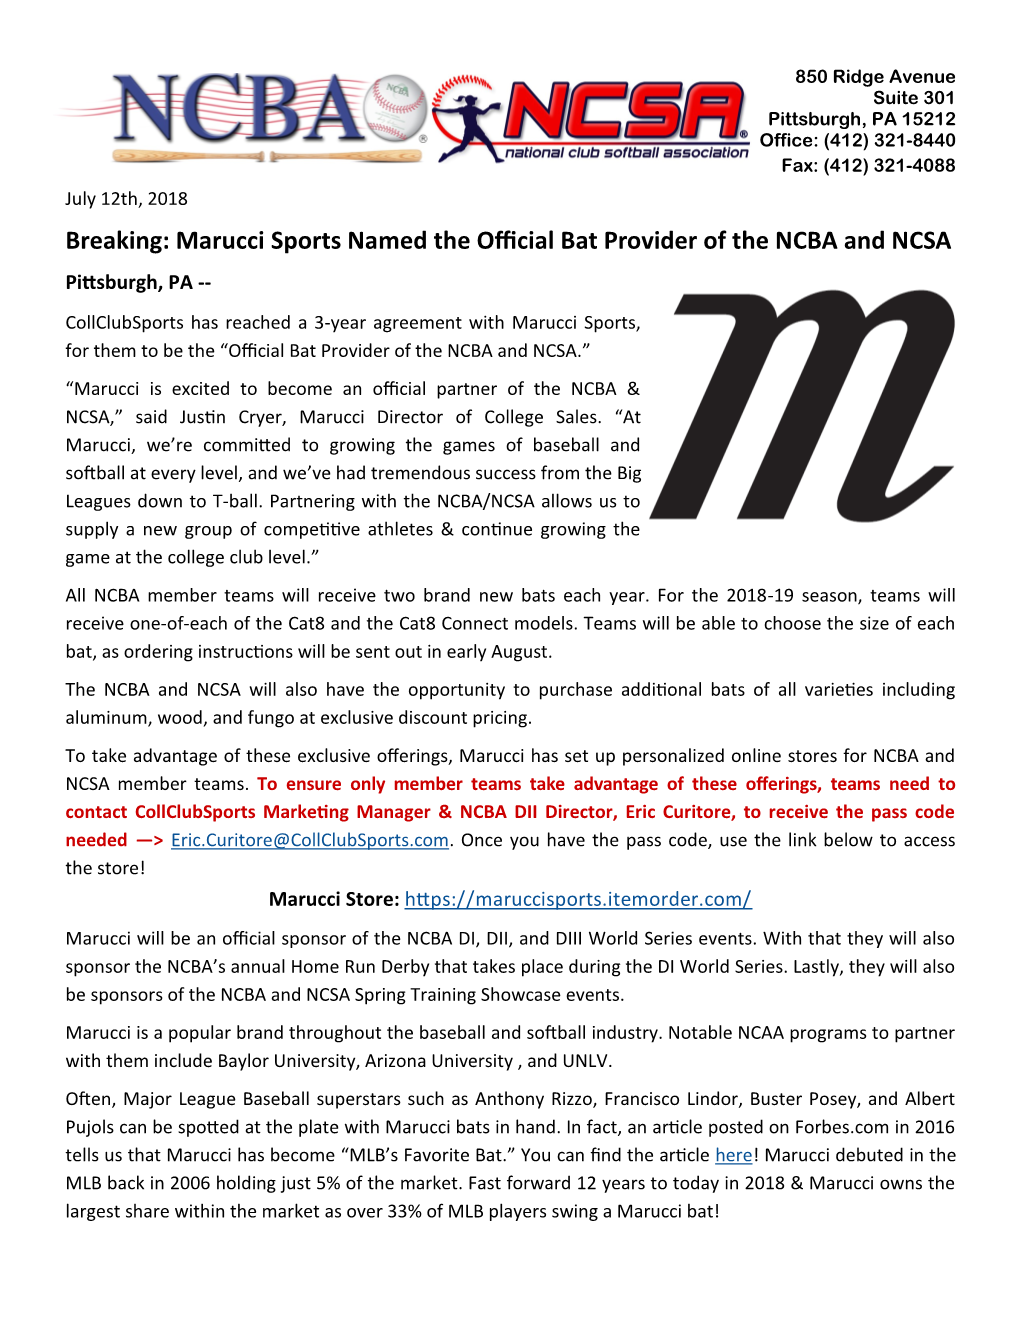 Breaking: Marucci Sports Named the Official Bat Provider of the NCBA